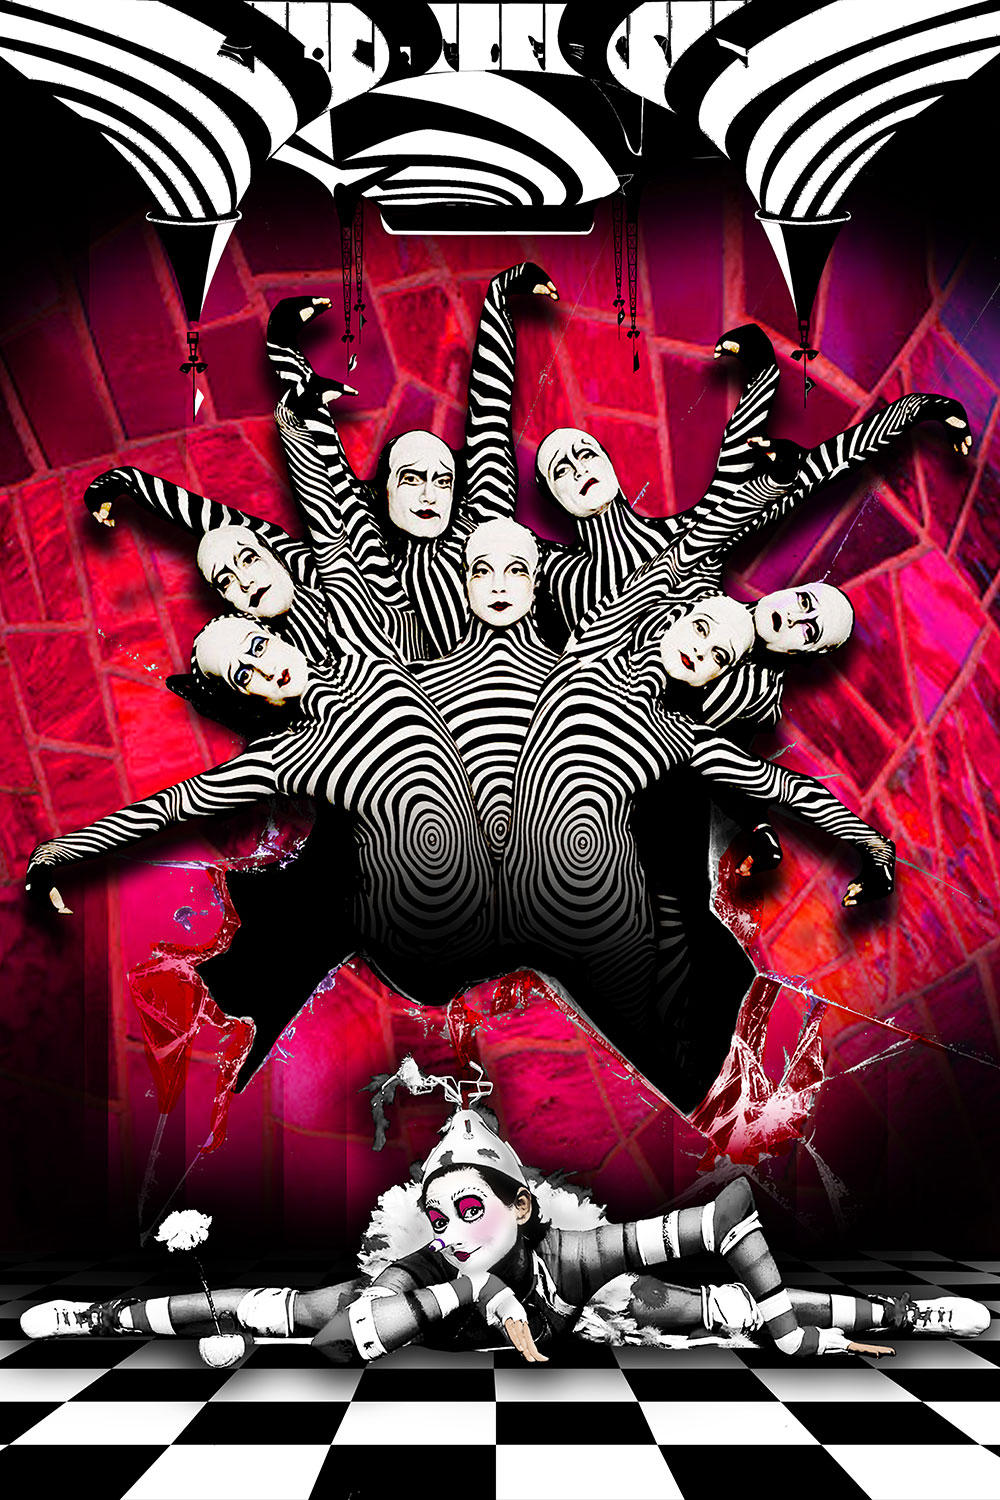 A photoshopped and illustrated image composed of several people appearing out of broken glass, dressed in black and white swirled costumes with white faces. 